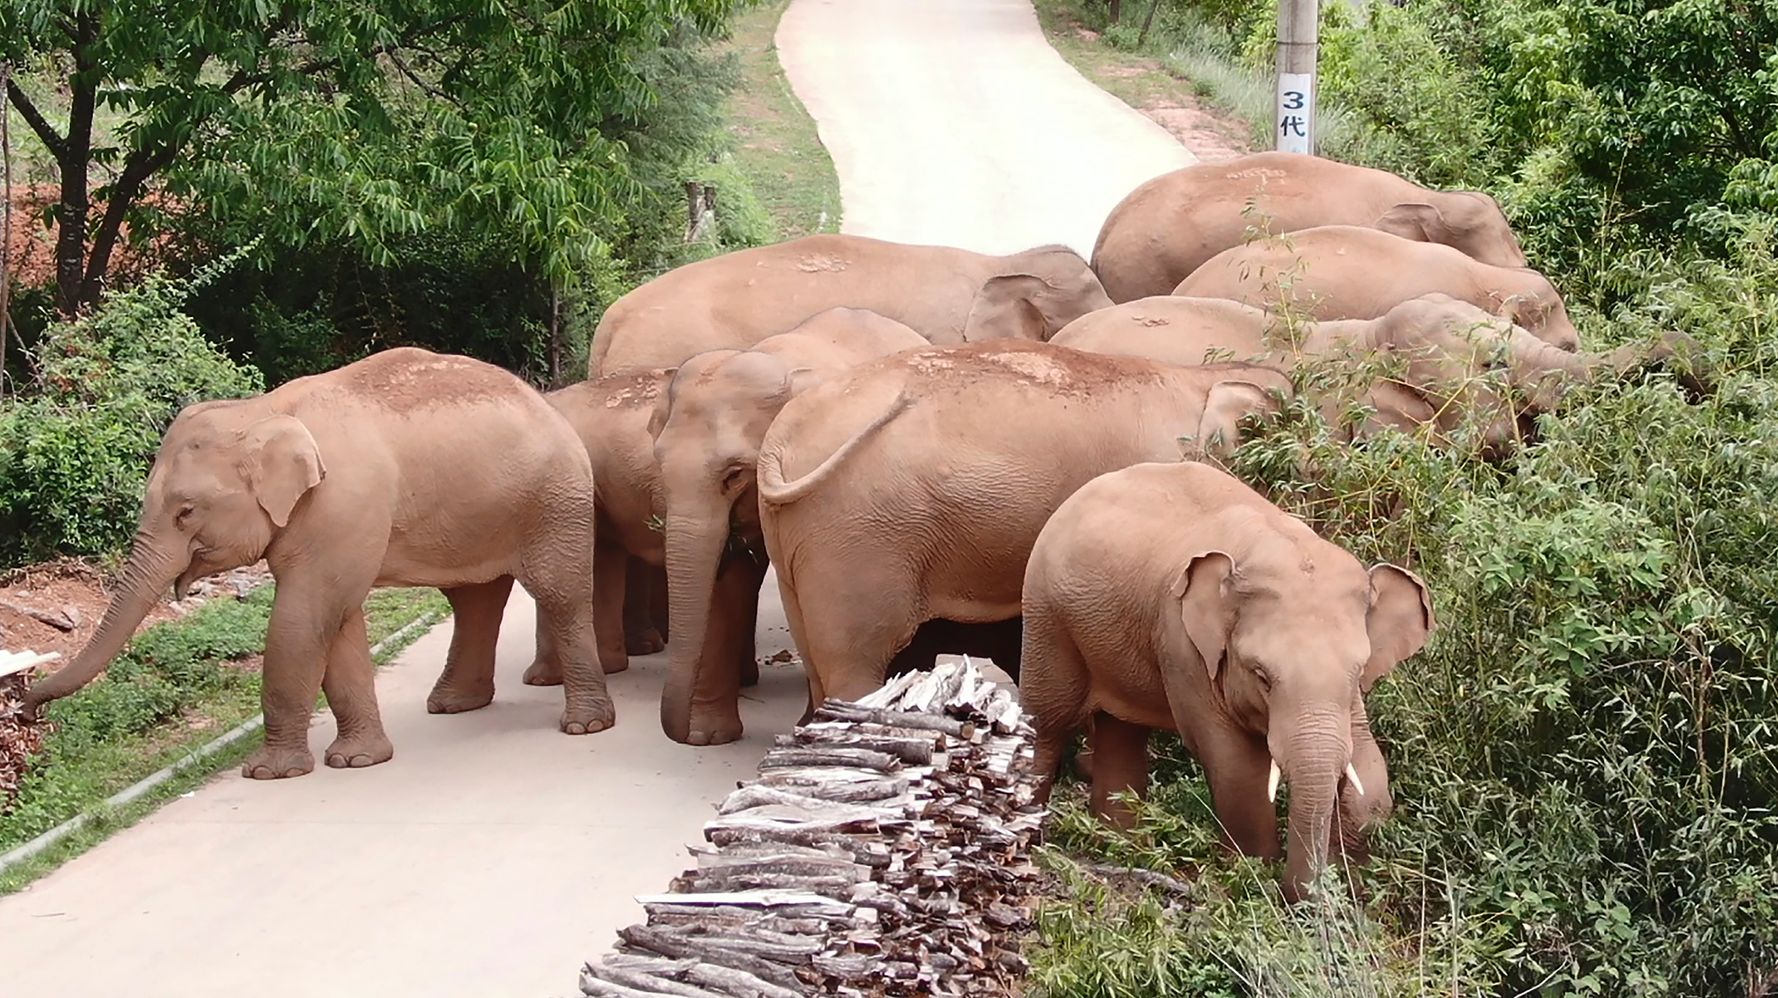 China's Famed Wandering Elephants Are On The Move Again